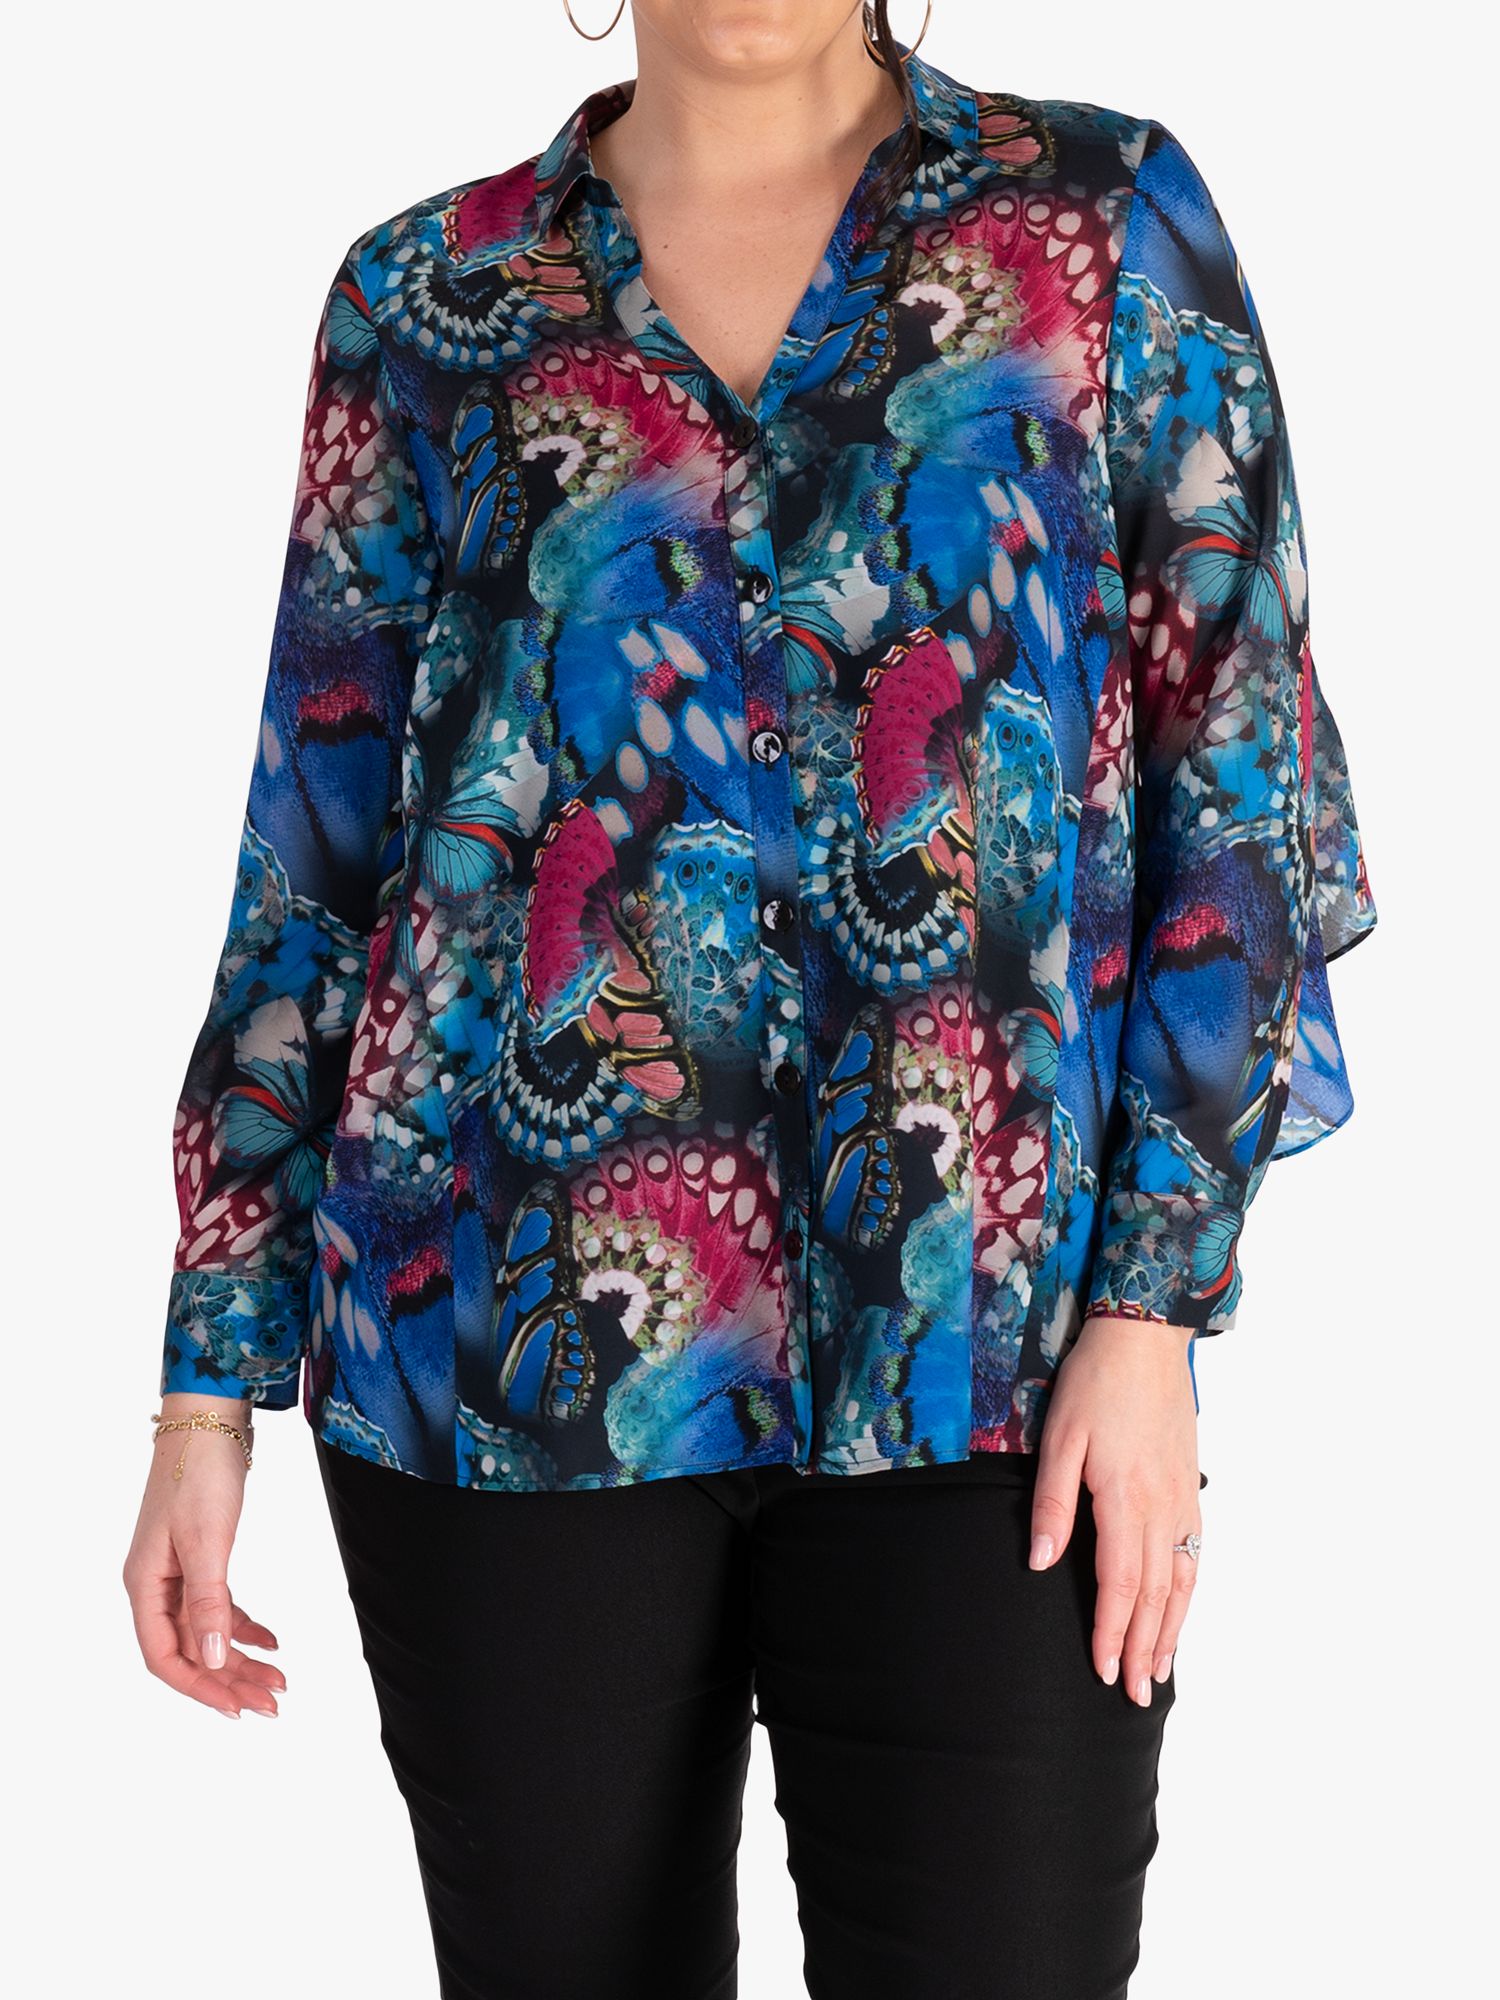 chesca Butterfly Print Blouse, Multi at John Lewis & Partners